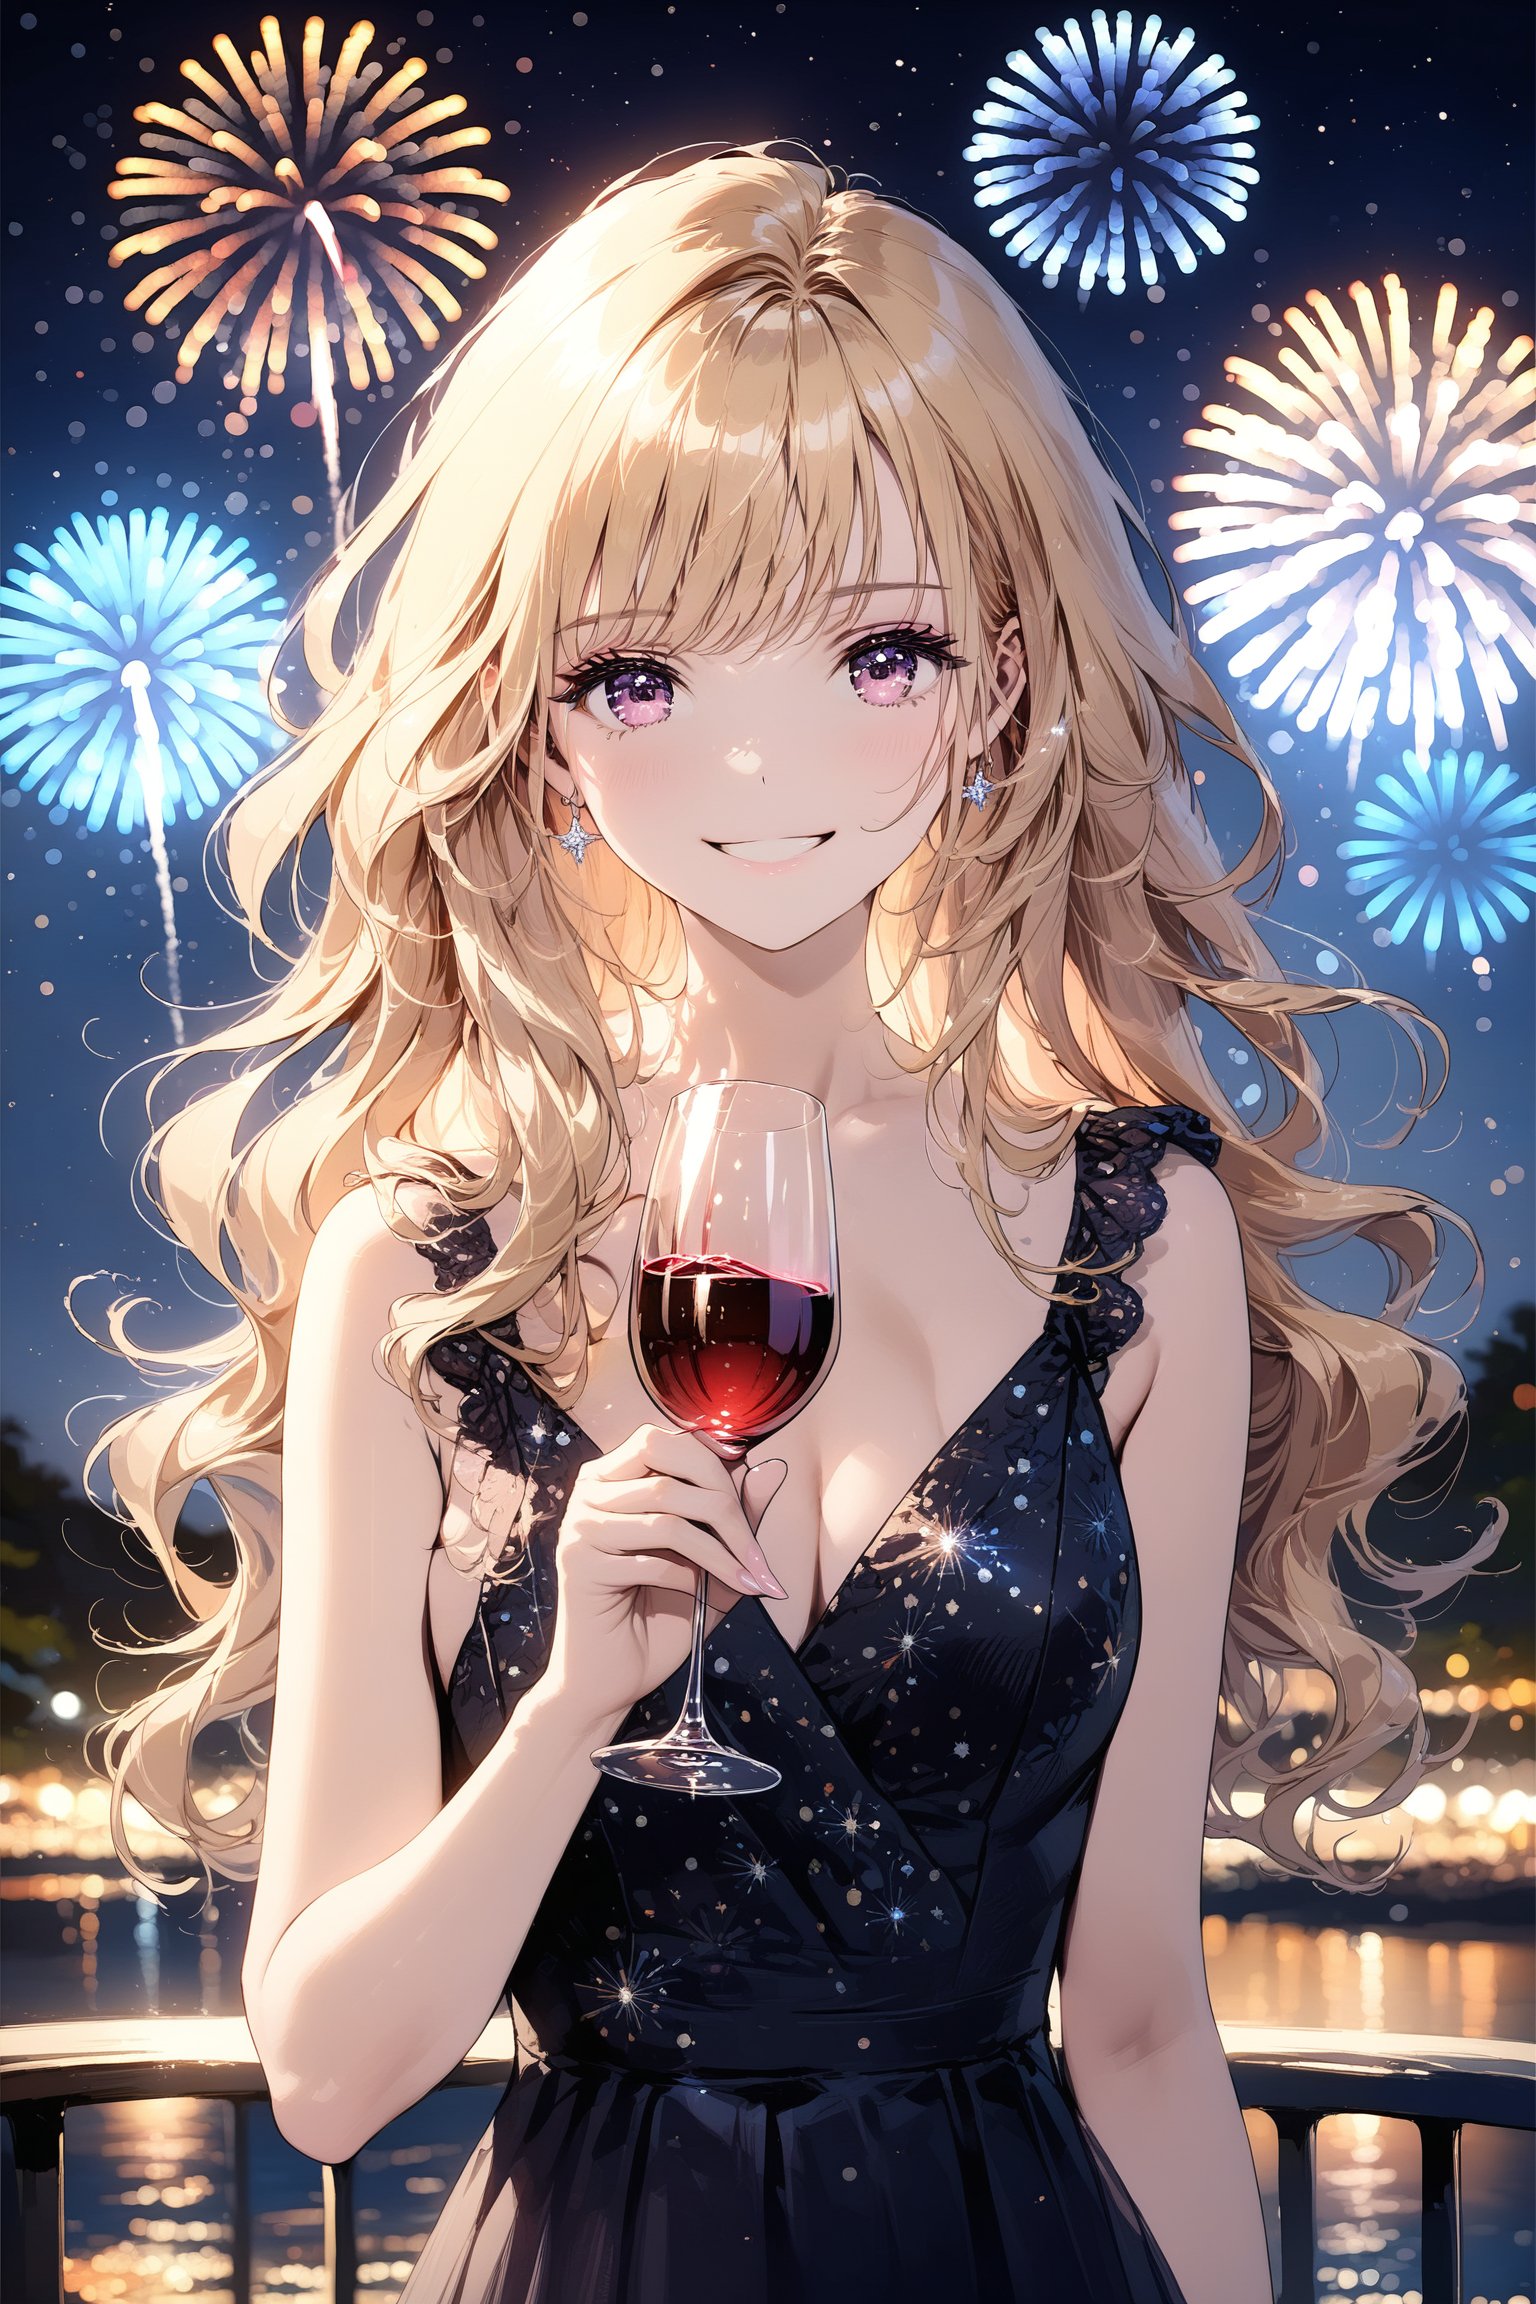 Cute girl, upper body, stunning image, beautiful blonde hair, detailed image, dynamic, modern evening dress outfit, holding a Glass of wine, firework in background, looking at viewer, charming smile, outdoors, night, ((masterpiece: 2)), light particles, extremely beautiful woman.